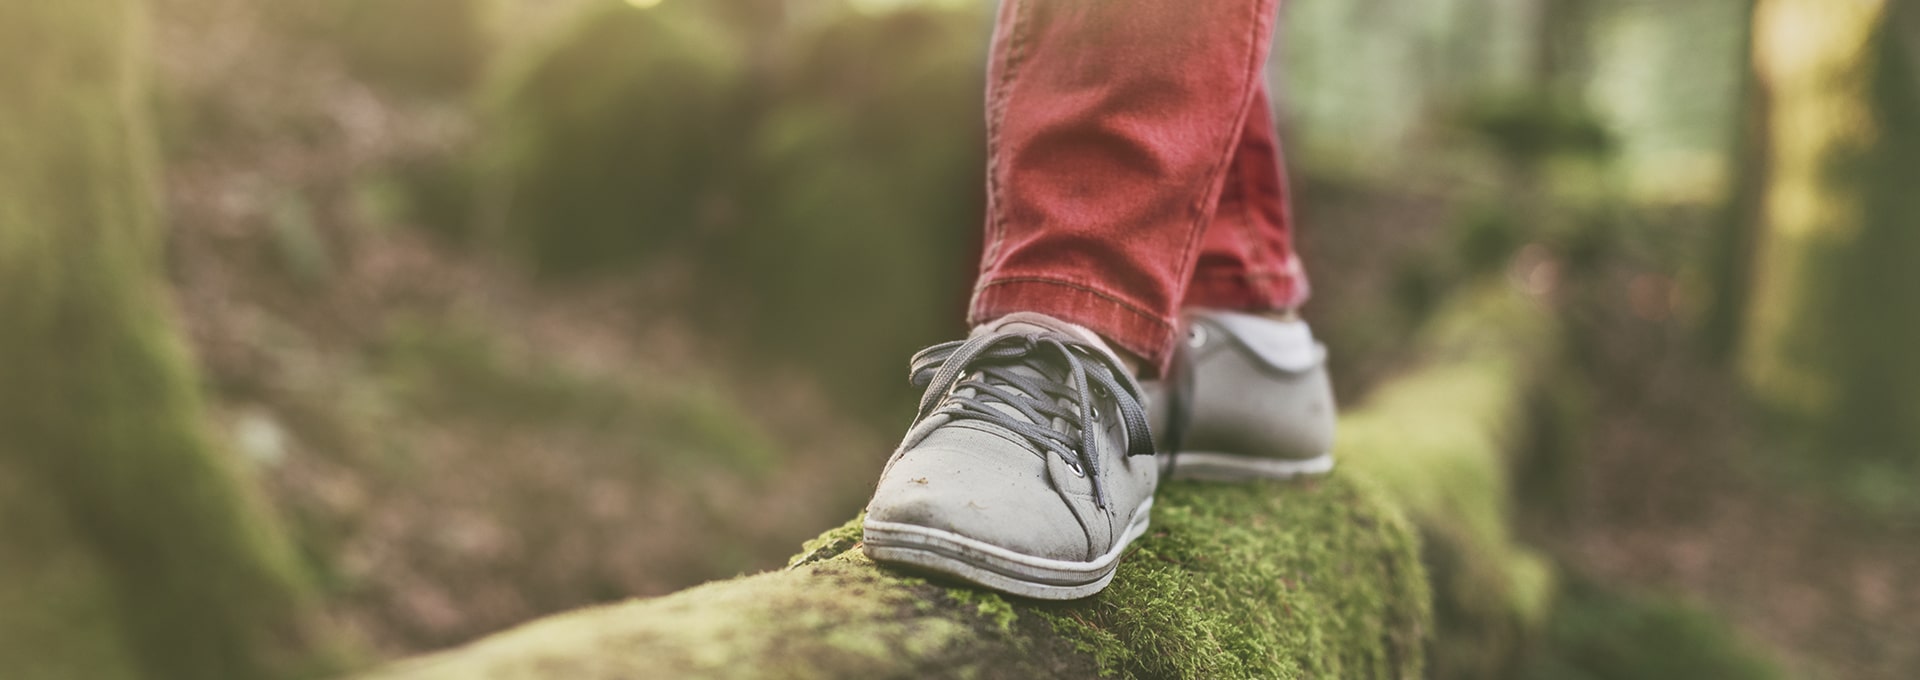 Feet wearing gray shoes balancing on a wooden log in the forest